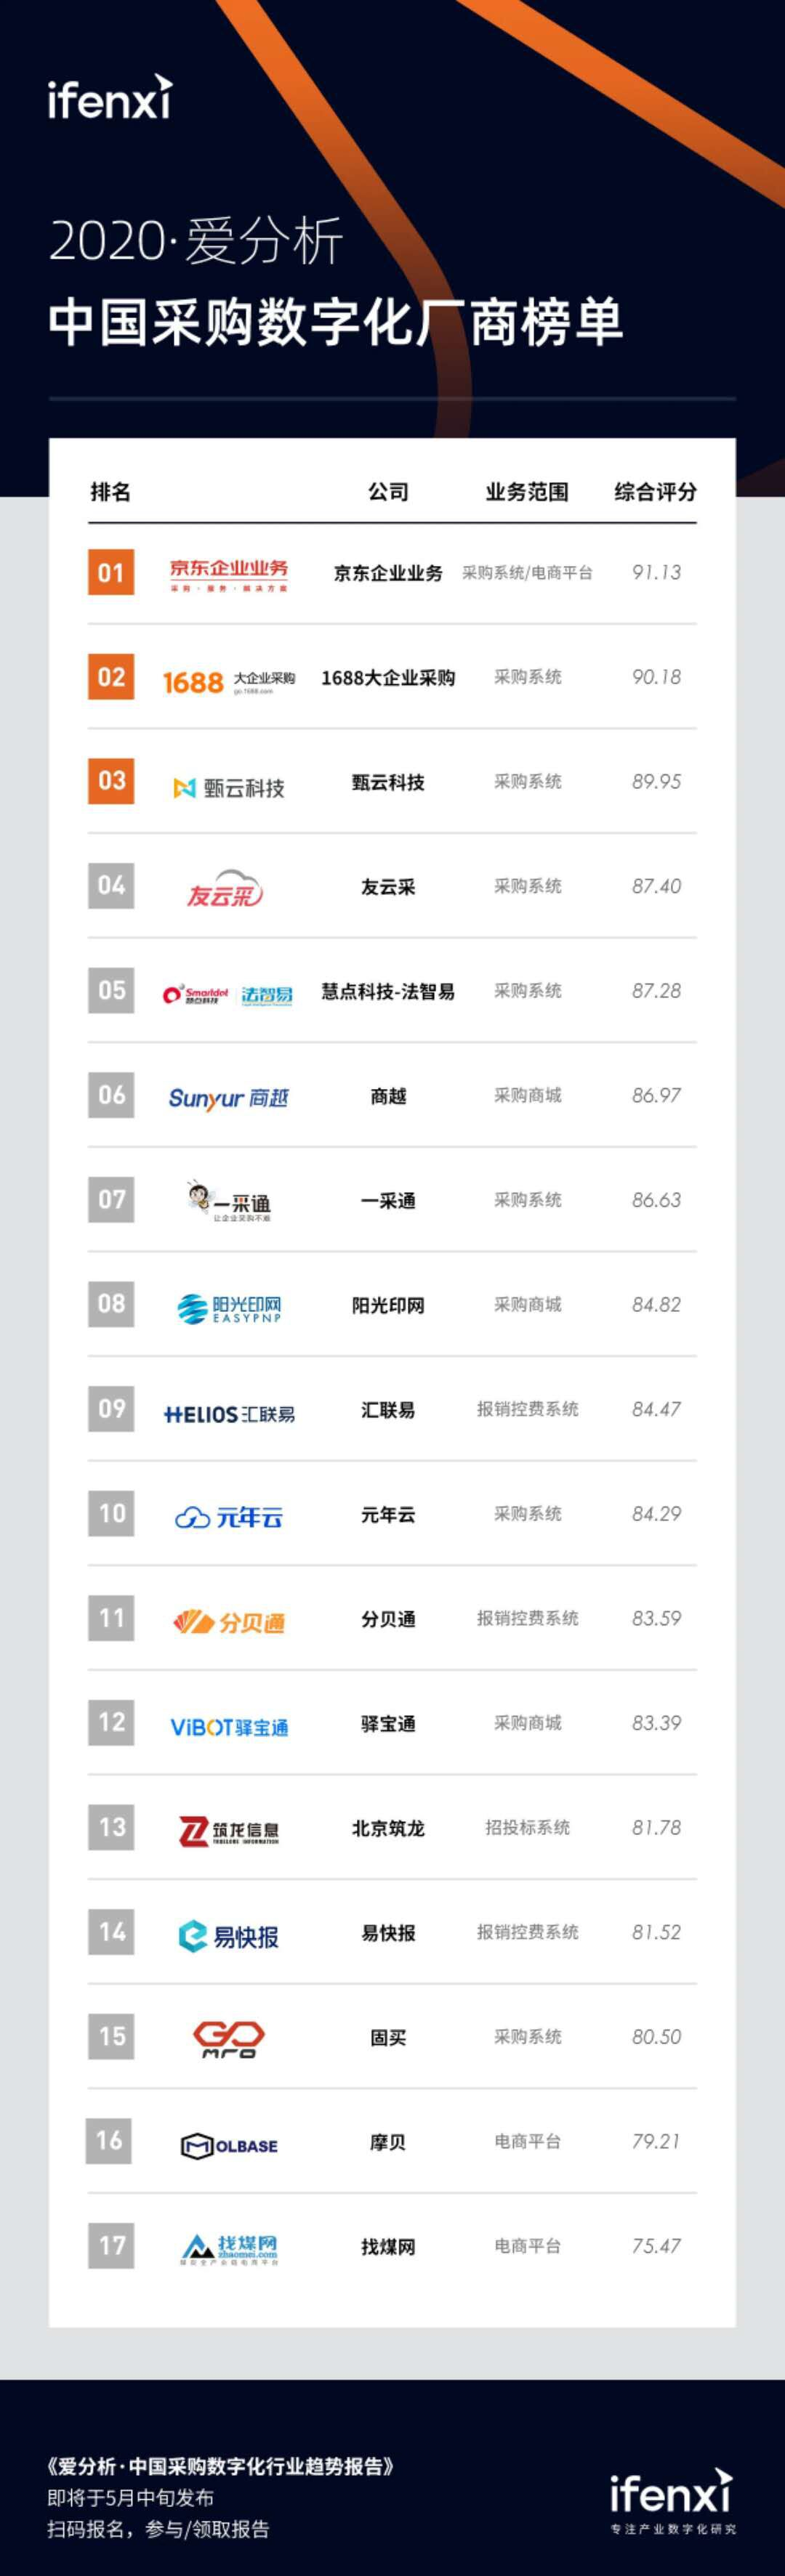 ifenxi, China’s leading analytics agency, released its latest ranking of China’s top digitized procurement service providers last week.